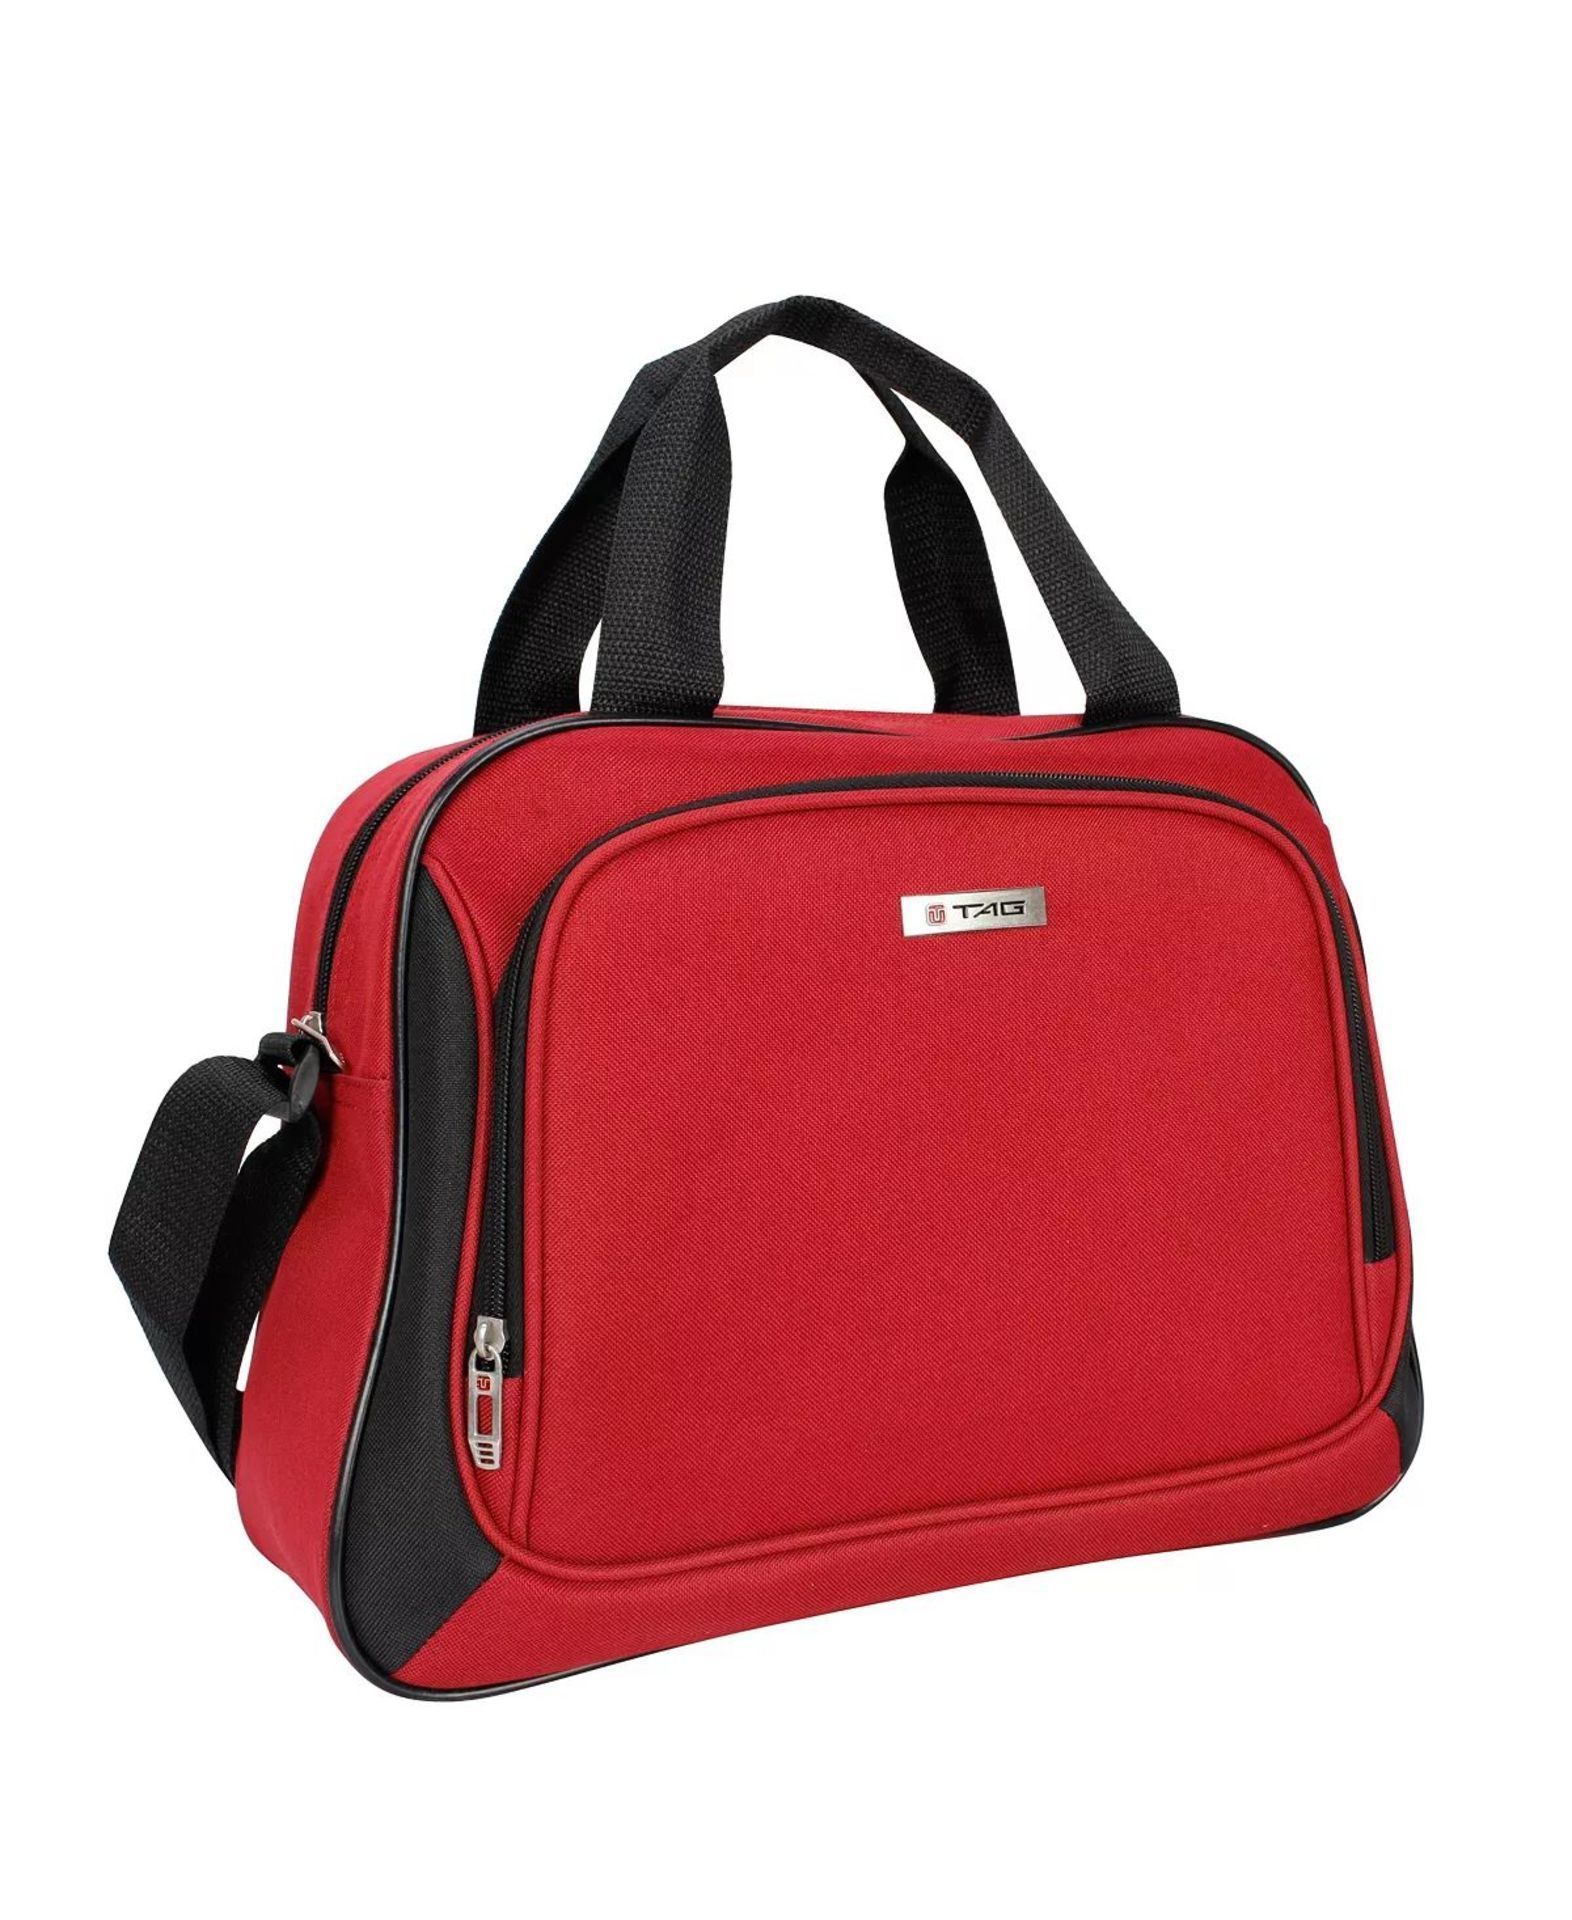 3 X NEW SETS OF TAG Ridgefield RED 5 Piece Softside Luggage Sets. RRP $300 per set, giving this - Image 3 of 5